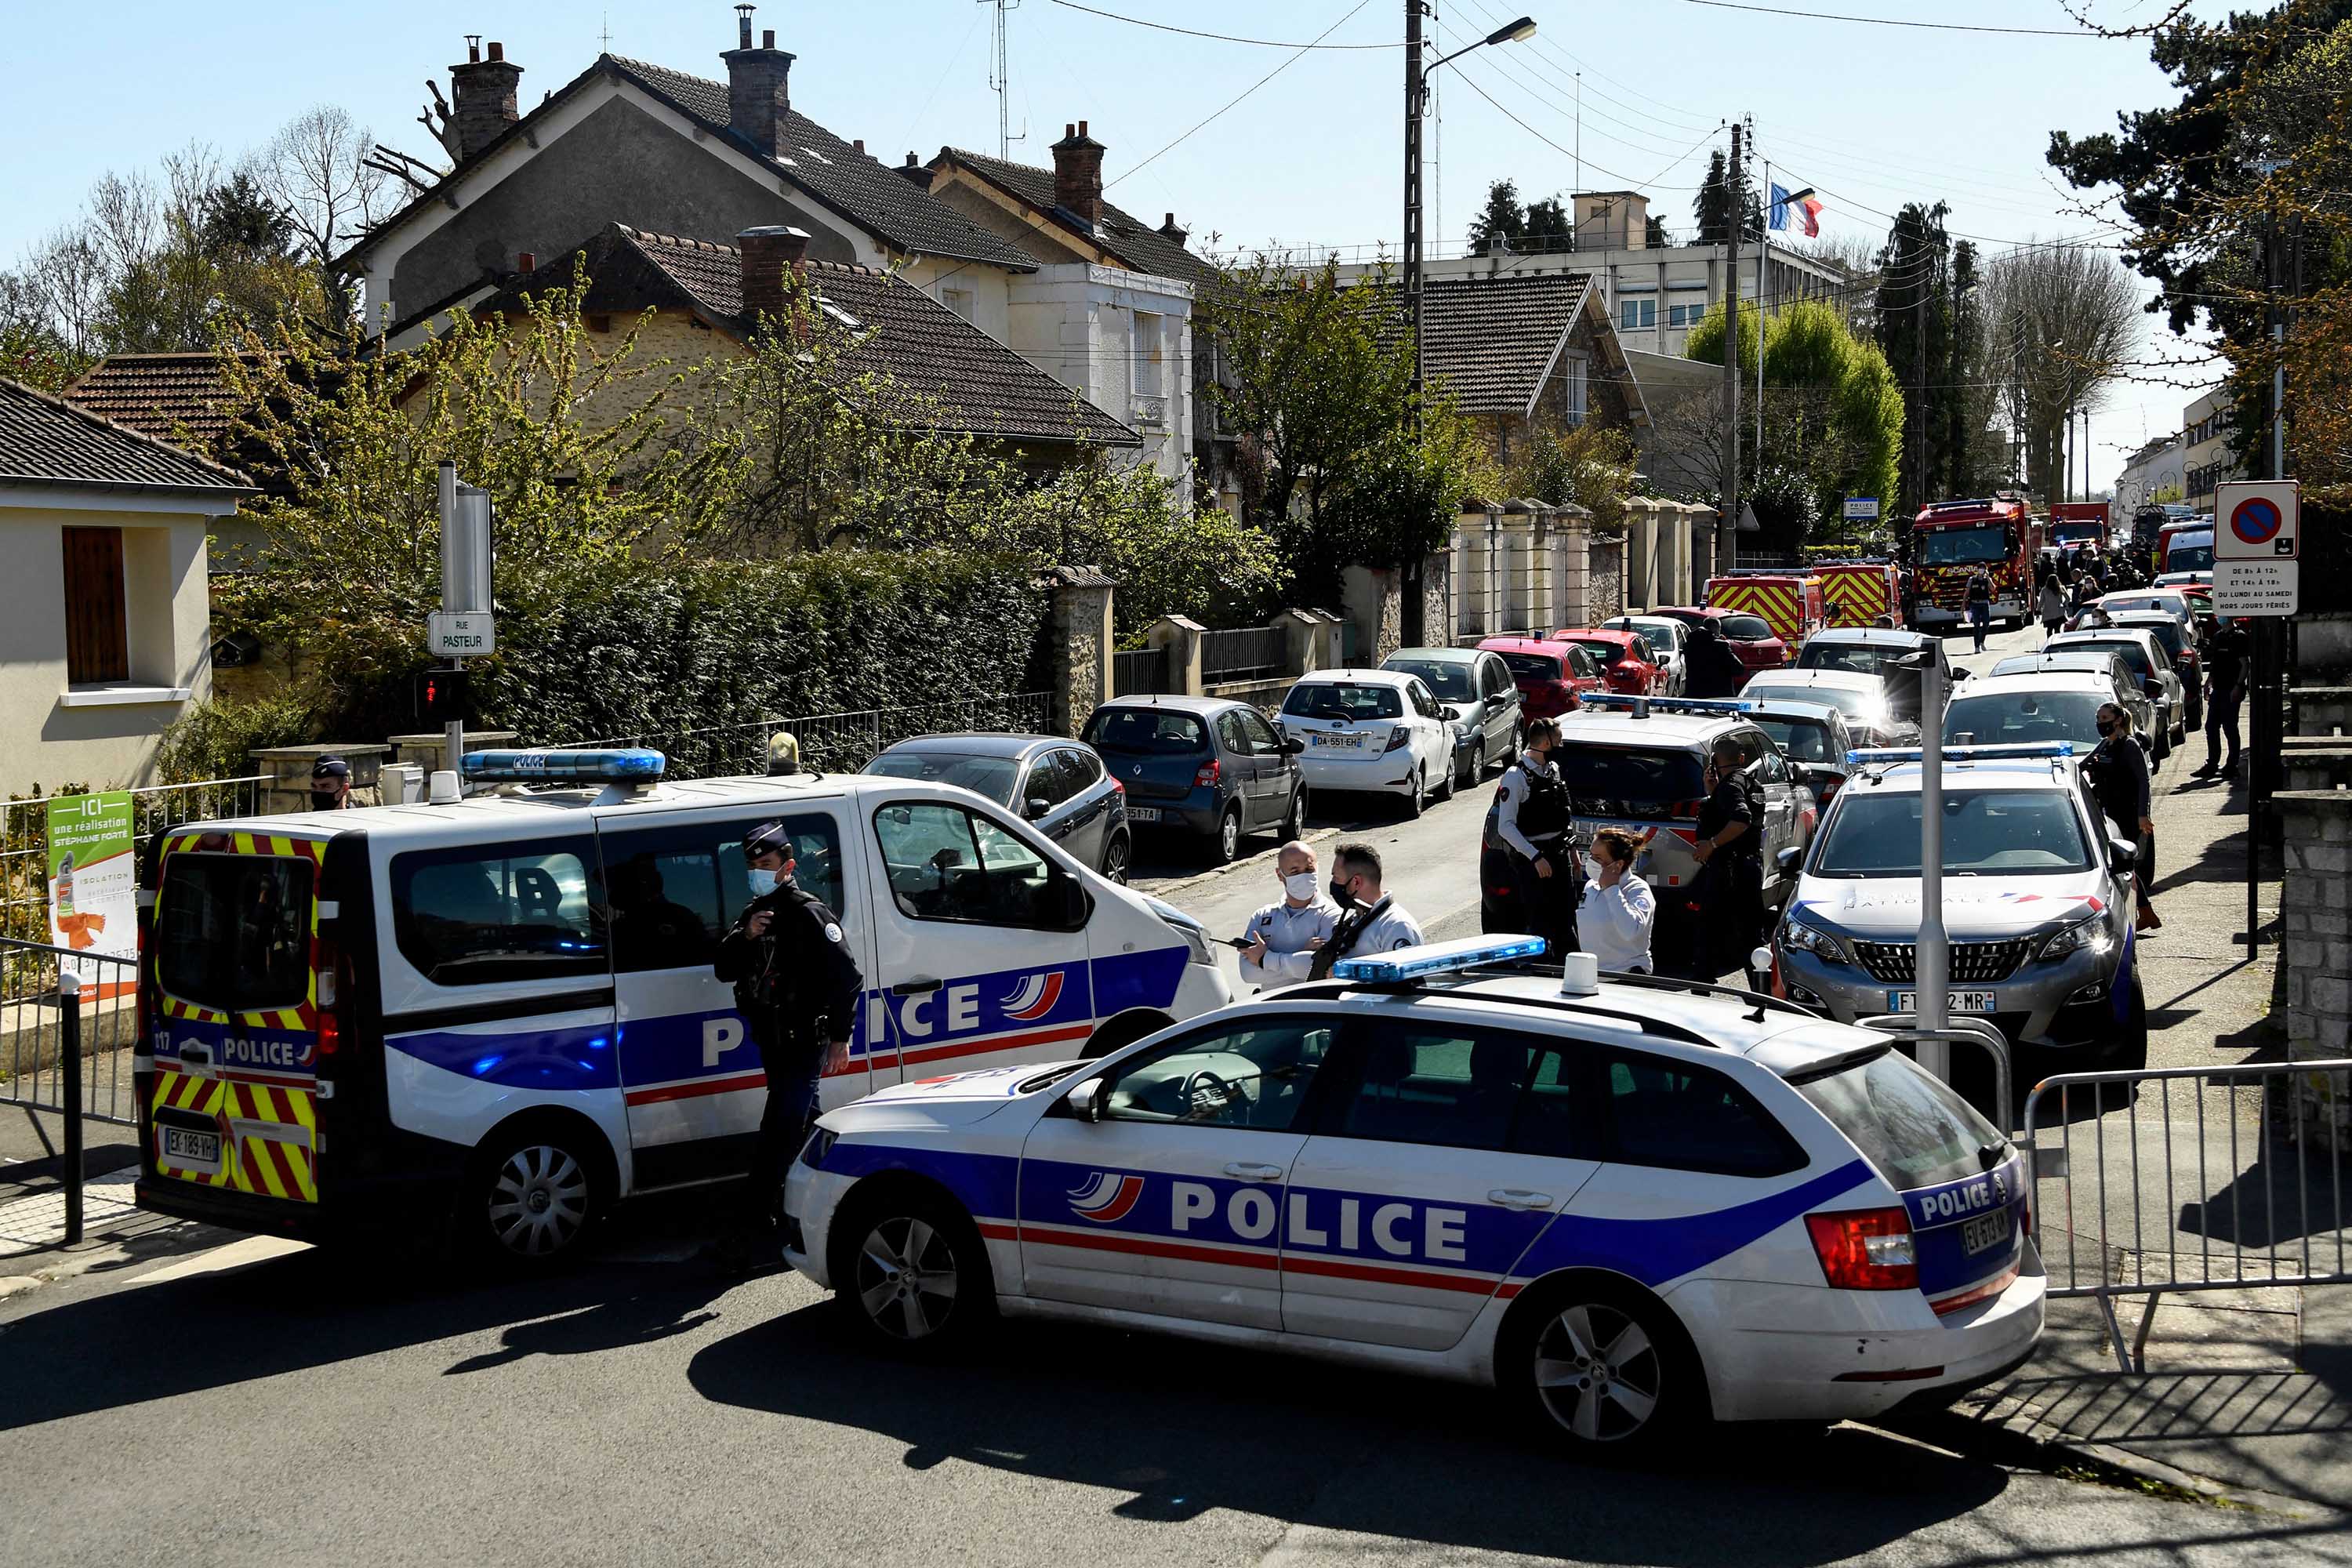 French police officer killed in knife attack near Paris